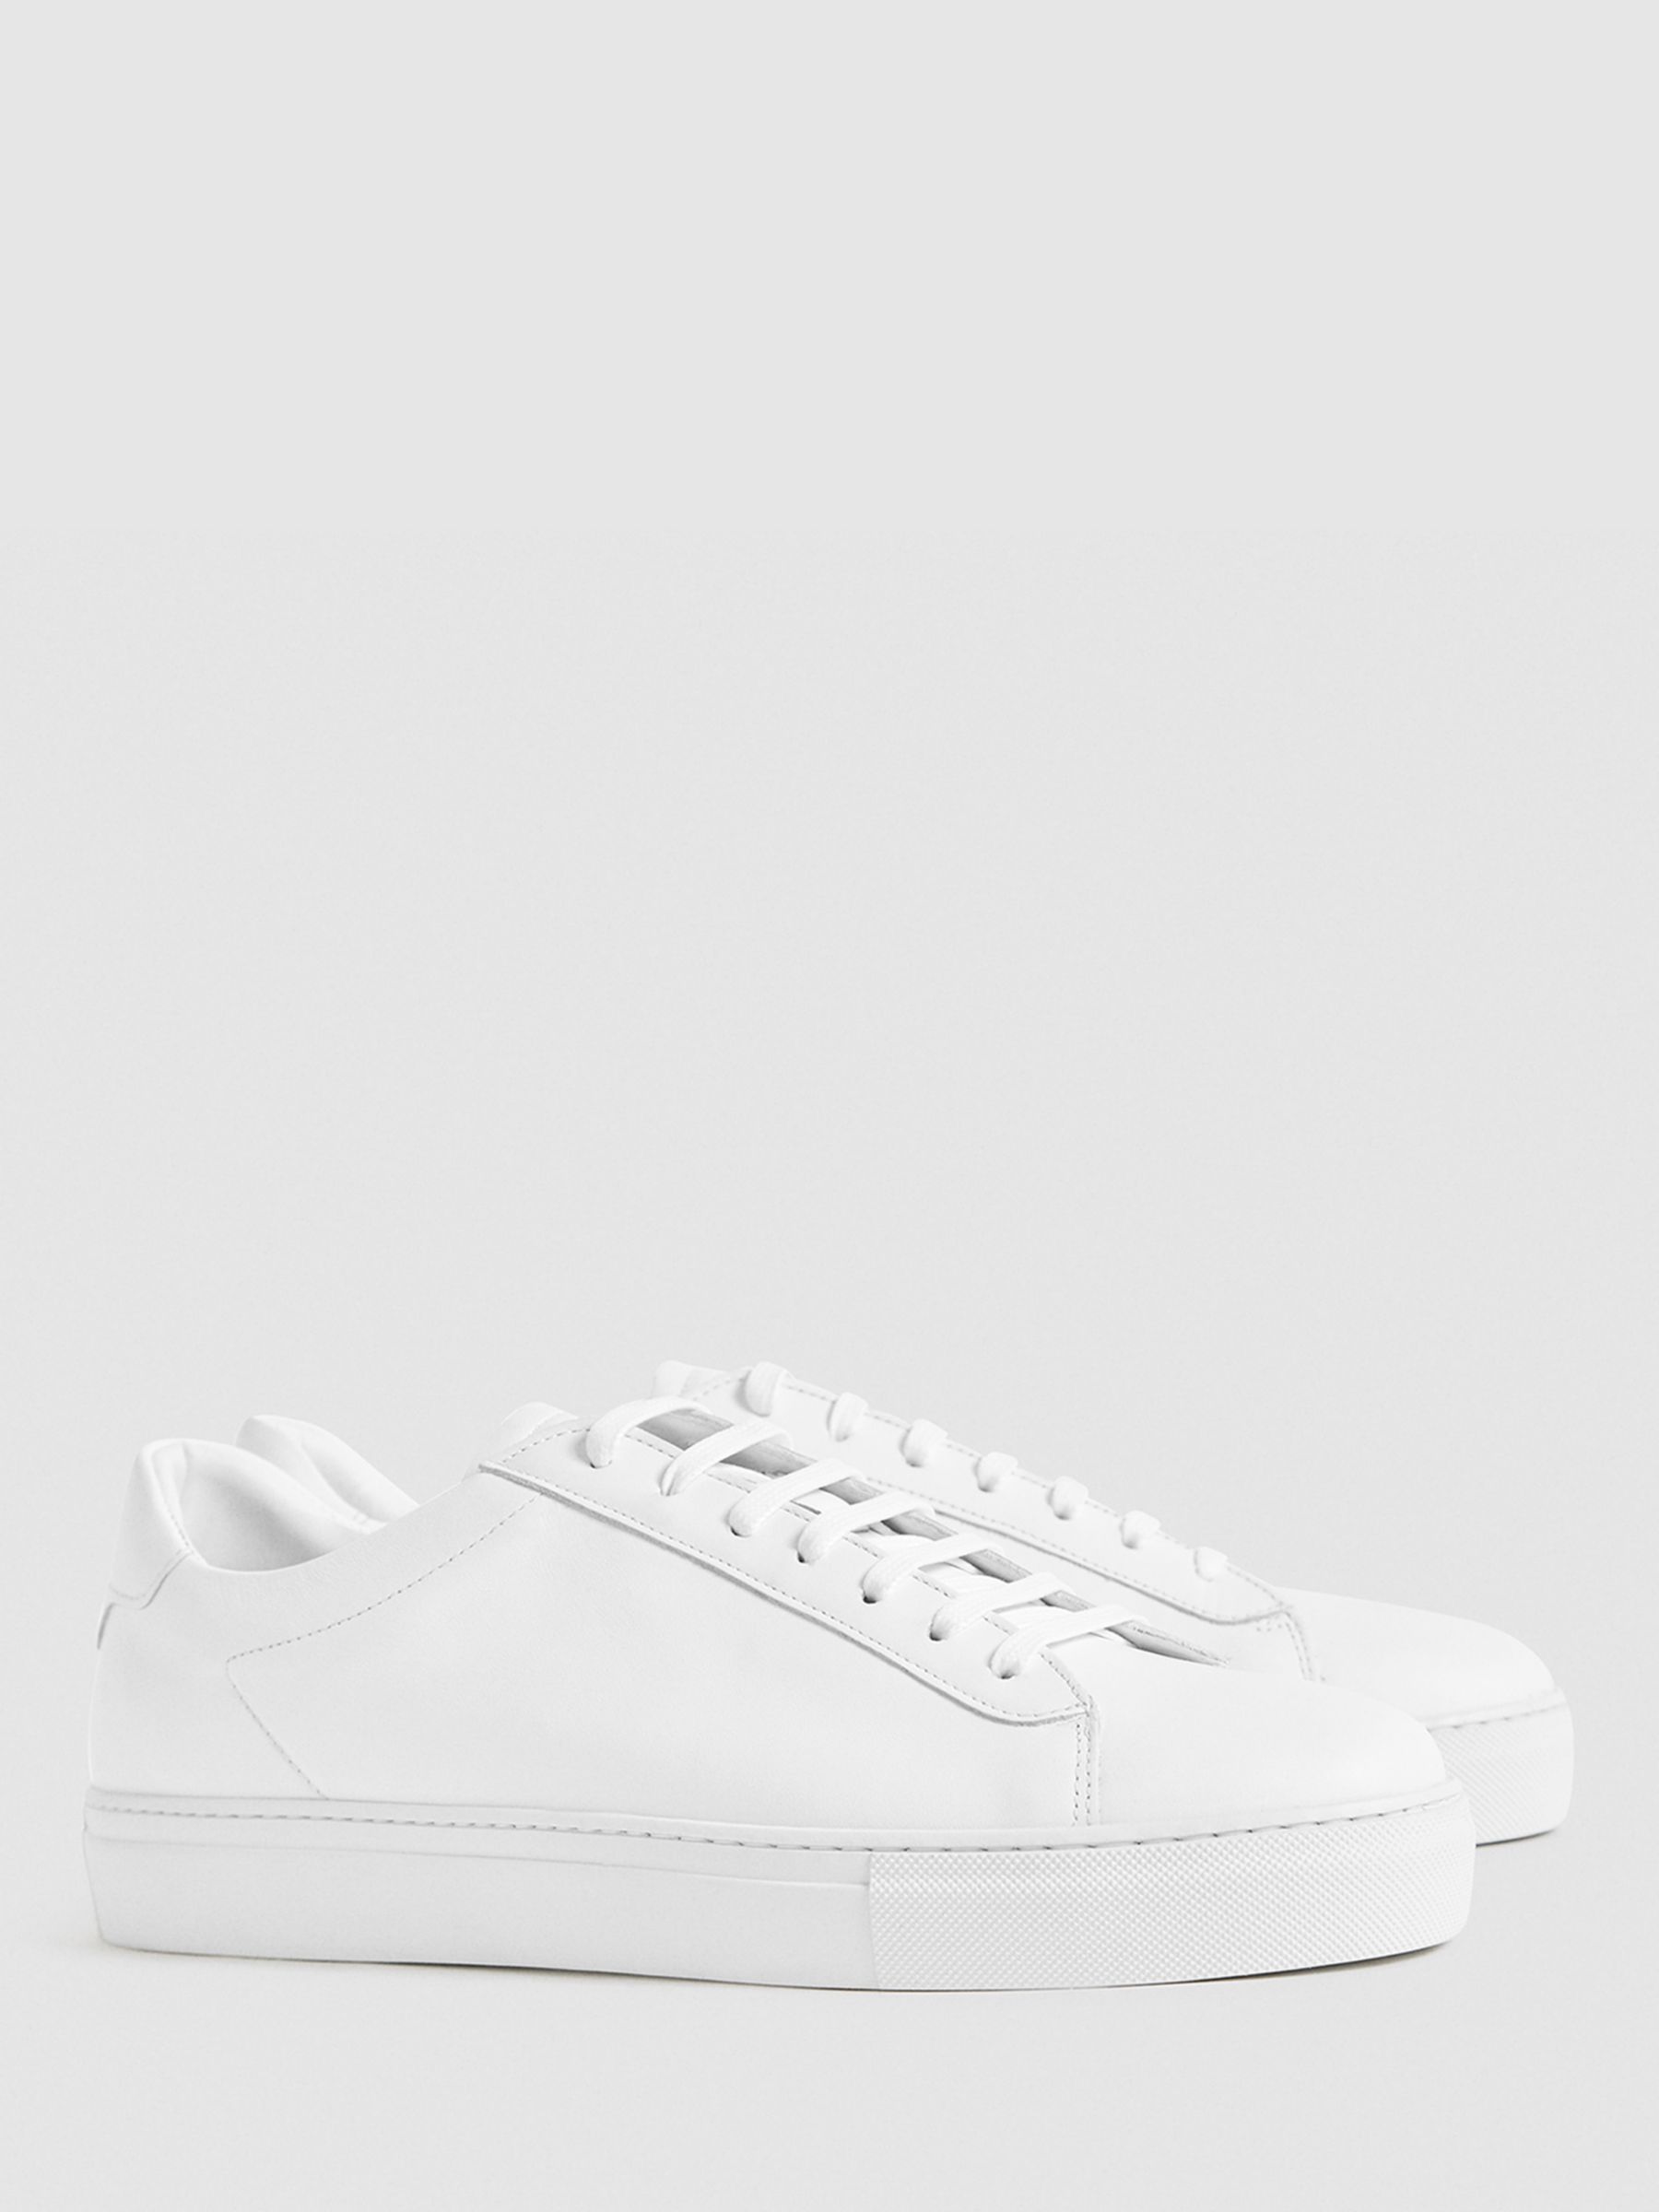 Reiss Finley Leather Trainers, White, 7